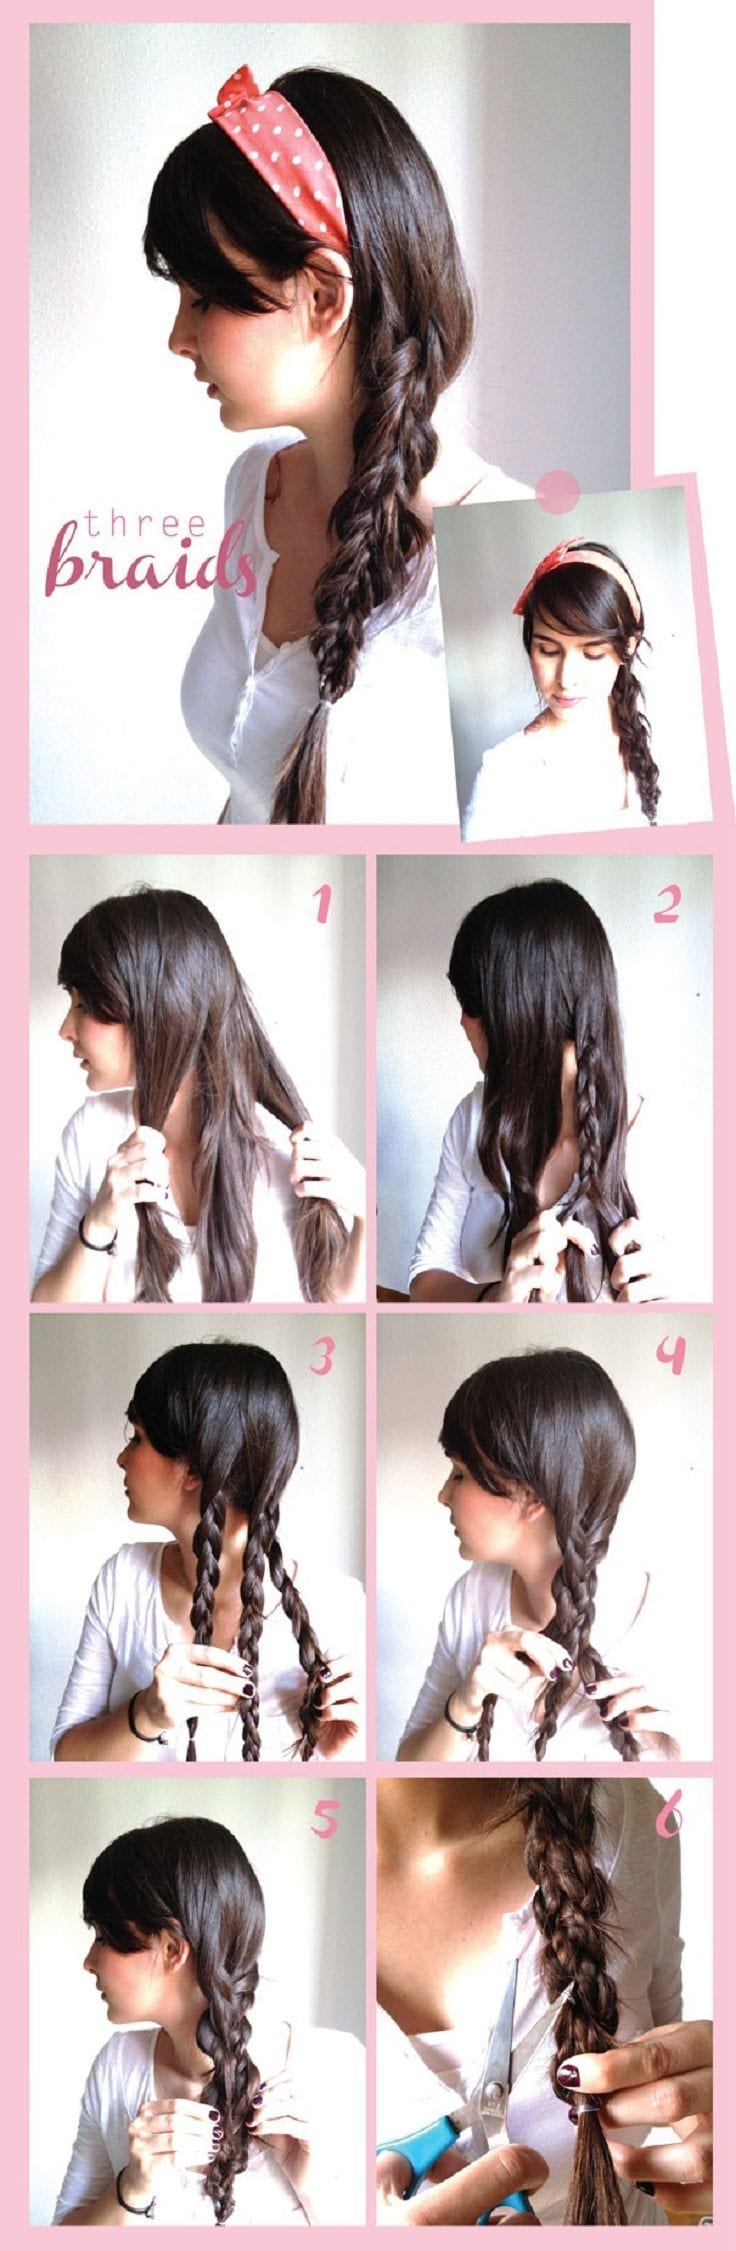 Top 148+ 3 easy braided hairstyles super hot